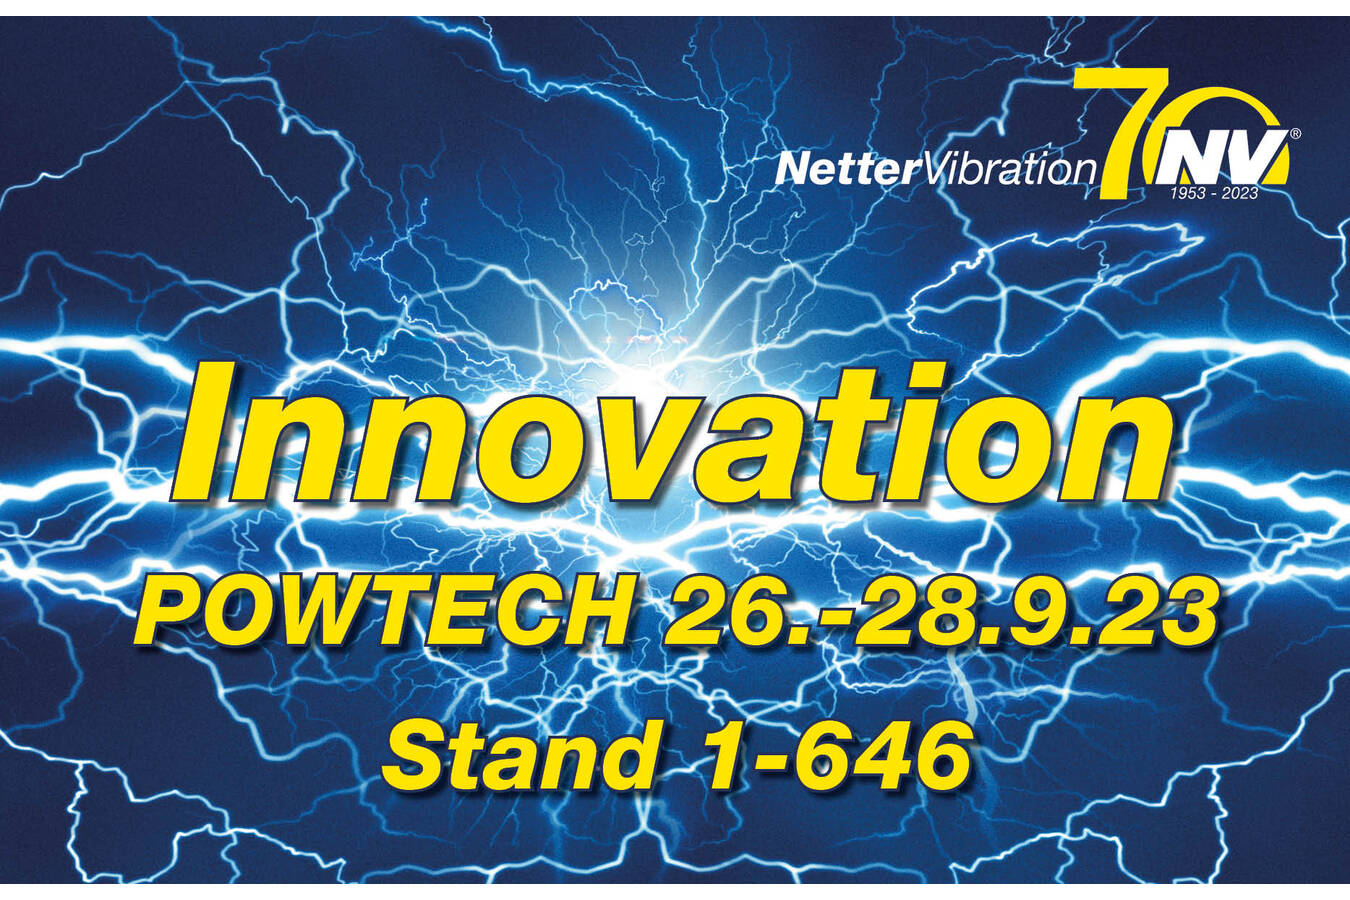 Innovation & tradition by NETTERVIBRATION at POWTECH 2023 